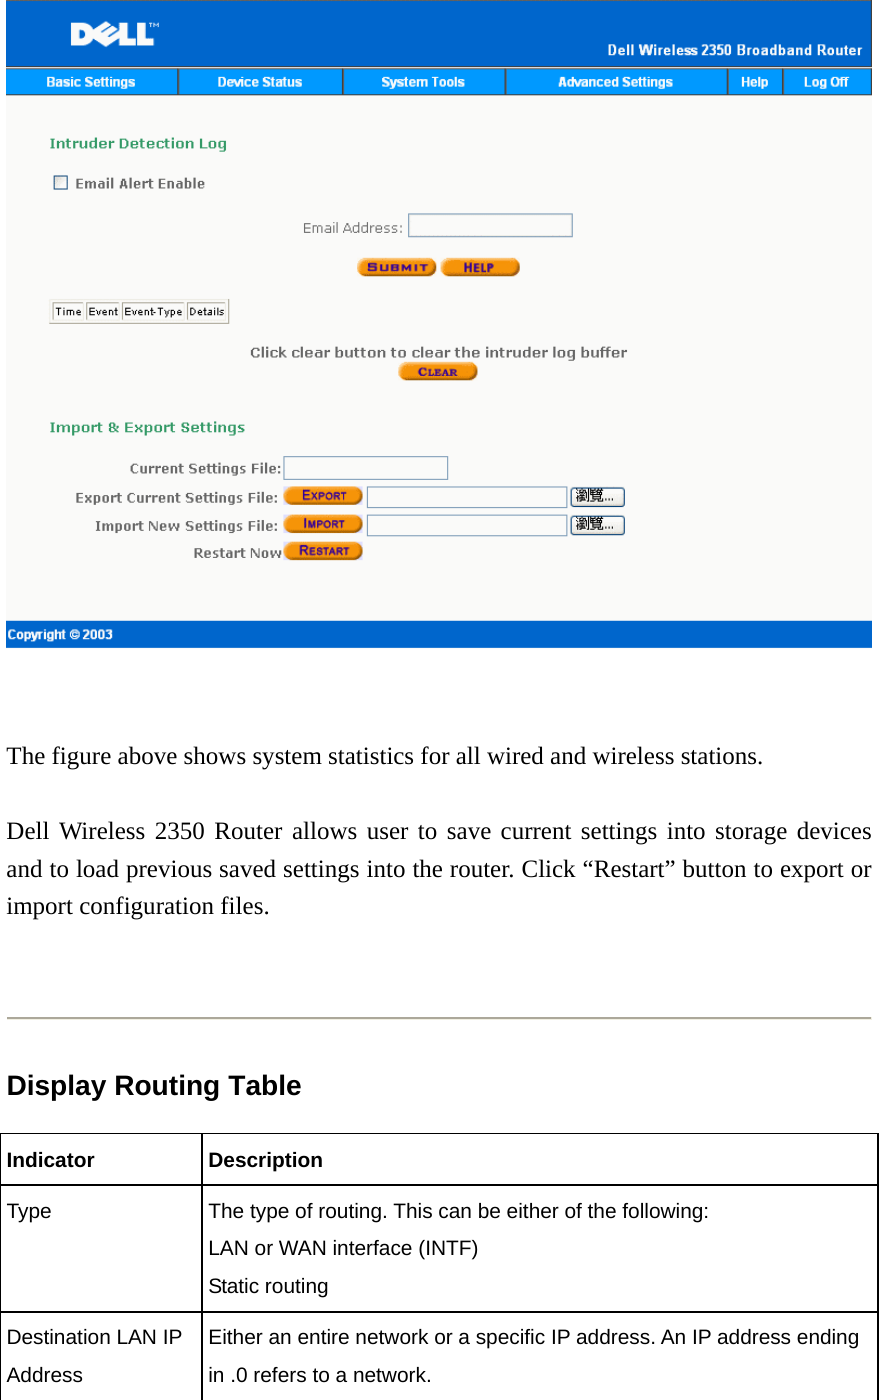      The figure above shows system statistics for all wired and wireless stations.   Dell Wireless 2350 Router allows user to save current settings into storage devices and to load previous saved settings into the router. Click “Restart” button to export or import configuration files.       Display Routing Table Indicator Description Type  The type of routing. This can be either of the following:   LAN or WAN interface (INTF) Static routing   Destination LAN IP Address Either an entire network or a specific IP address. An IP address ending in .0 refers to a network. 